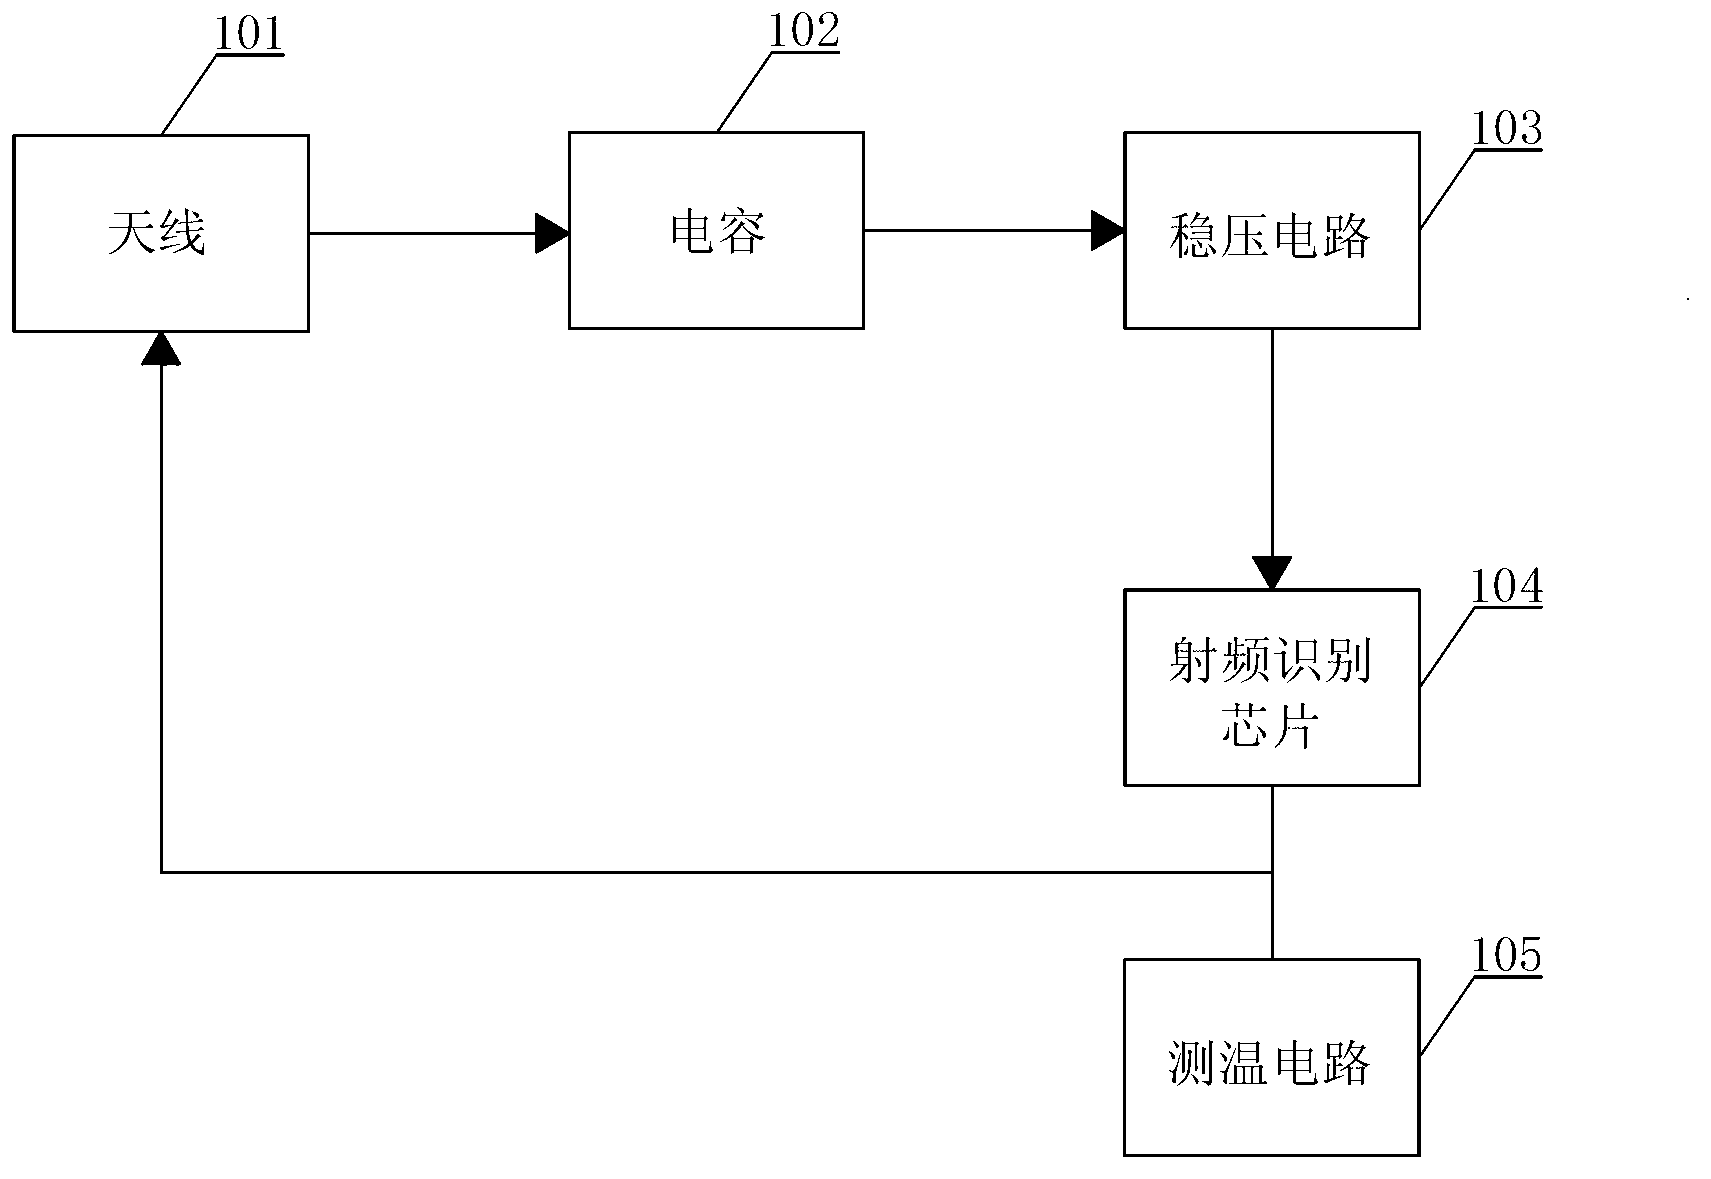 Stomach-stored electronic tag with temperature measuring function